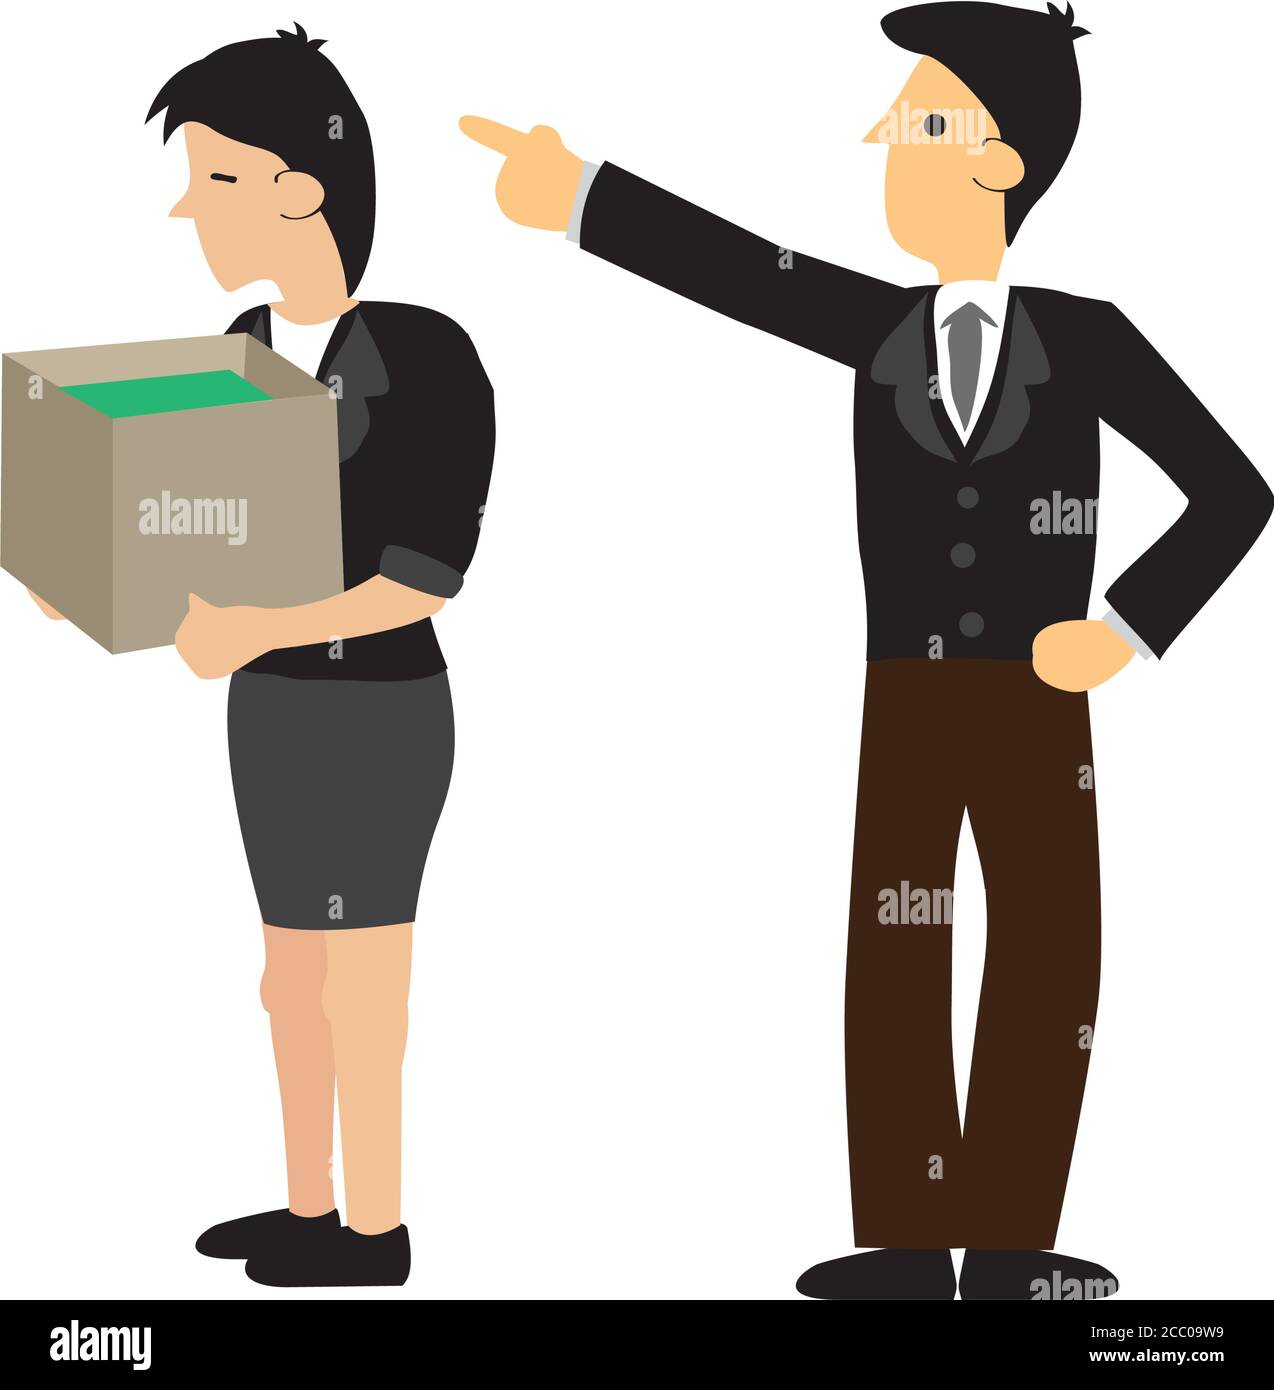 Business professionals order to leave by employer. Concept of retrenchment. Cartoon vector illustration on company restructuring exercise. Stock Vector